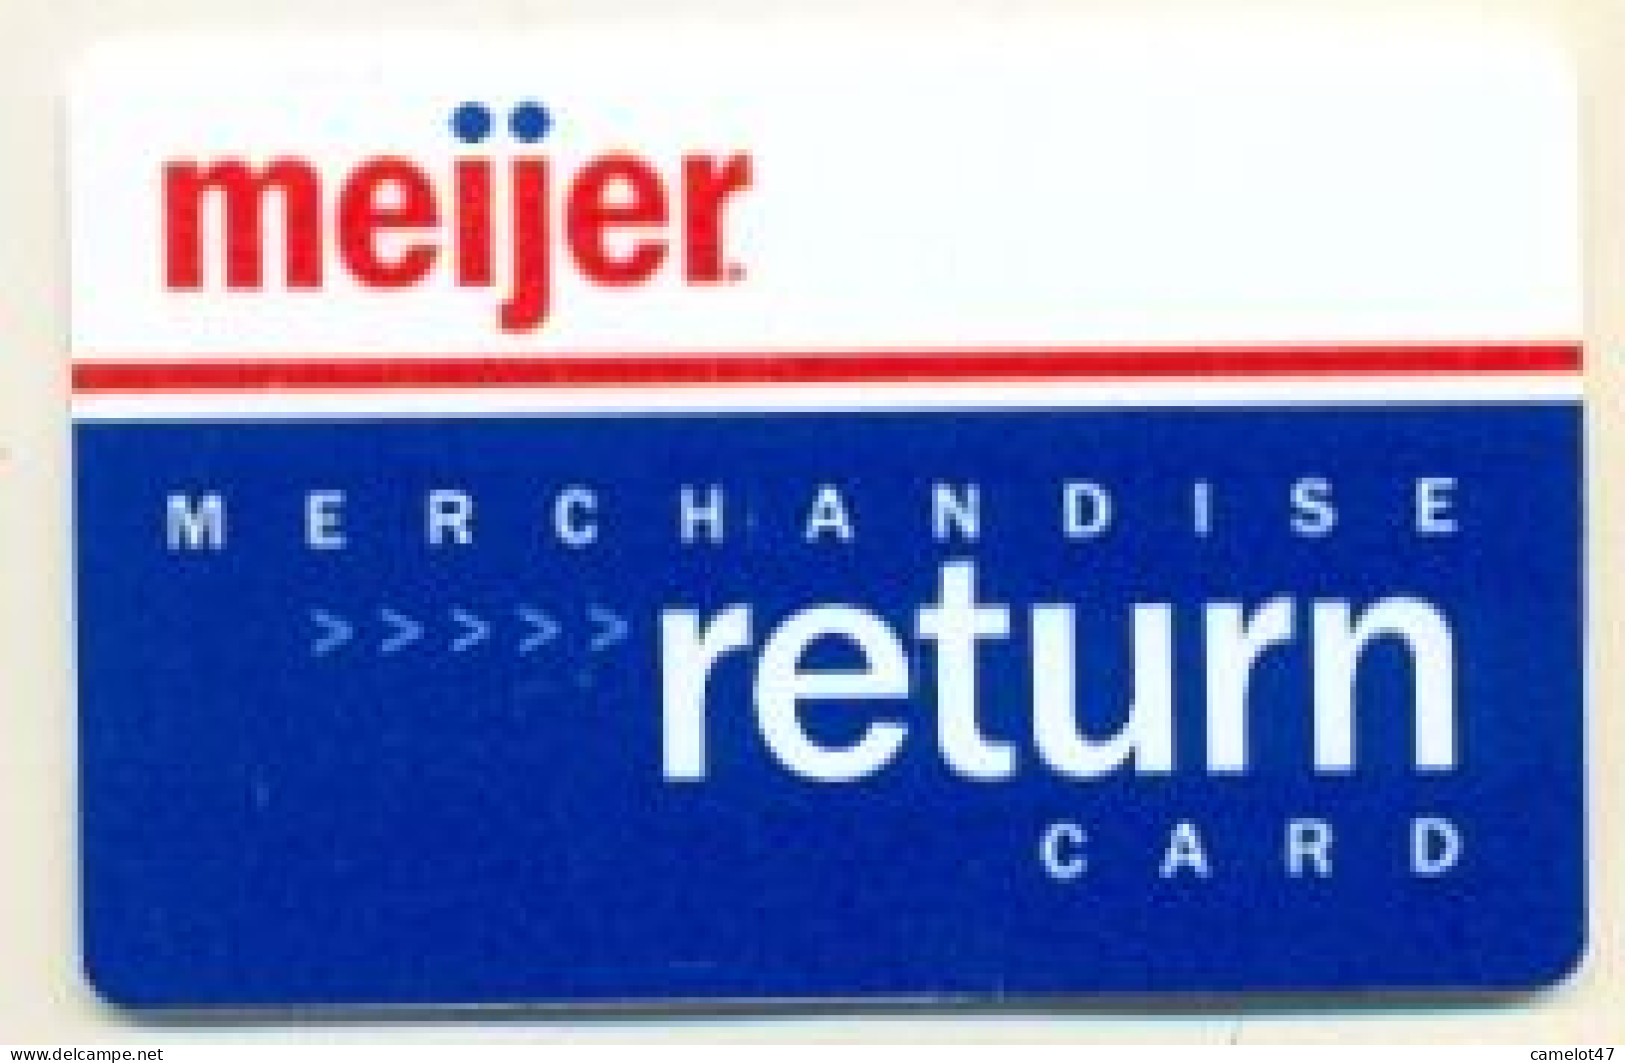 Meijer  U.S.A.,  Merchandise Return Card, Carte Pour Collection, Sans Valeur, # Meijer-1 - Gift And Loyalty Cards